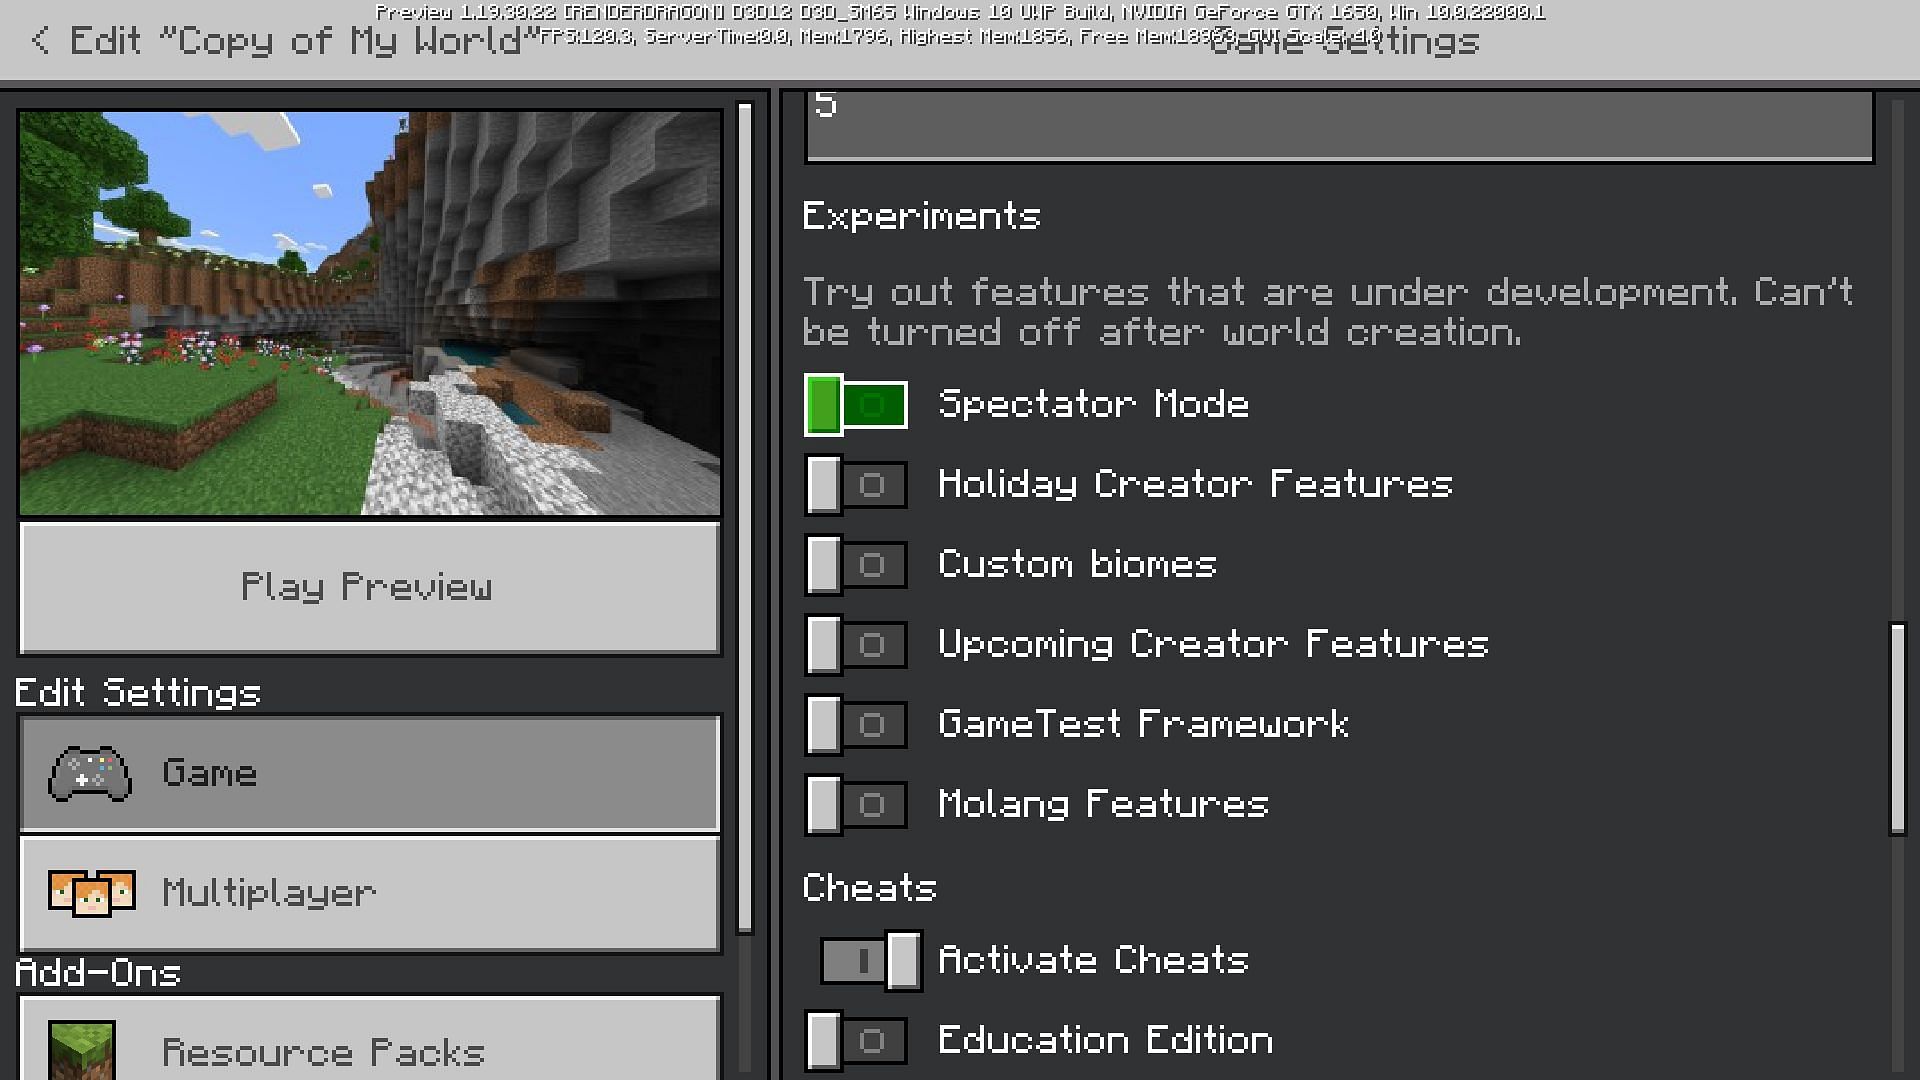 Spectator mode is currently under experimental settings in Minecraft beta 1.19.30.22 (Image via Mojang)